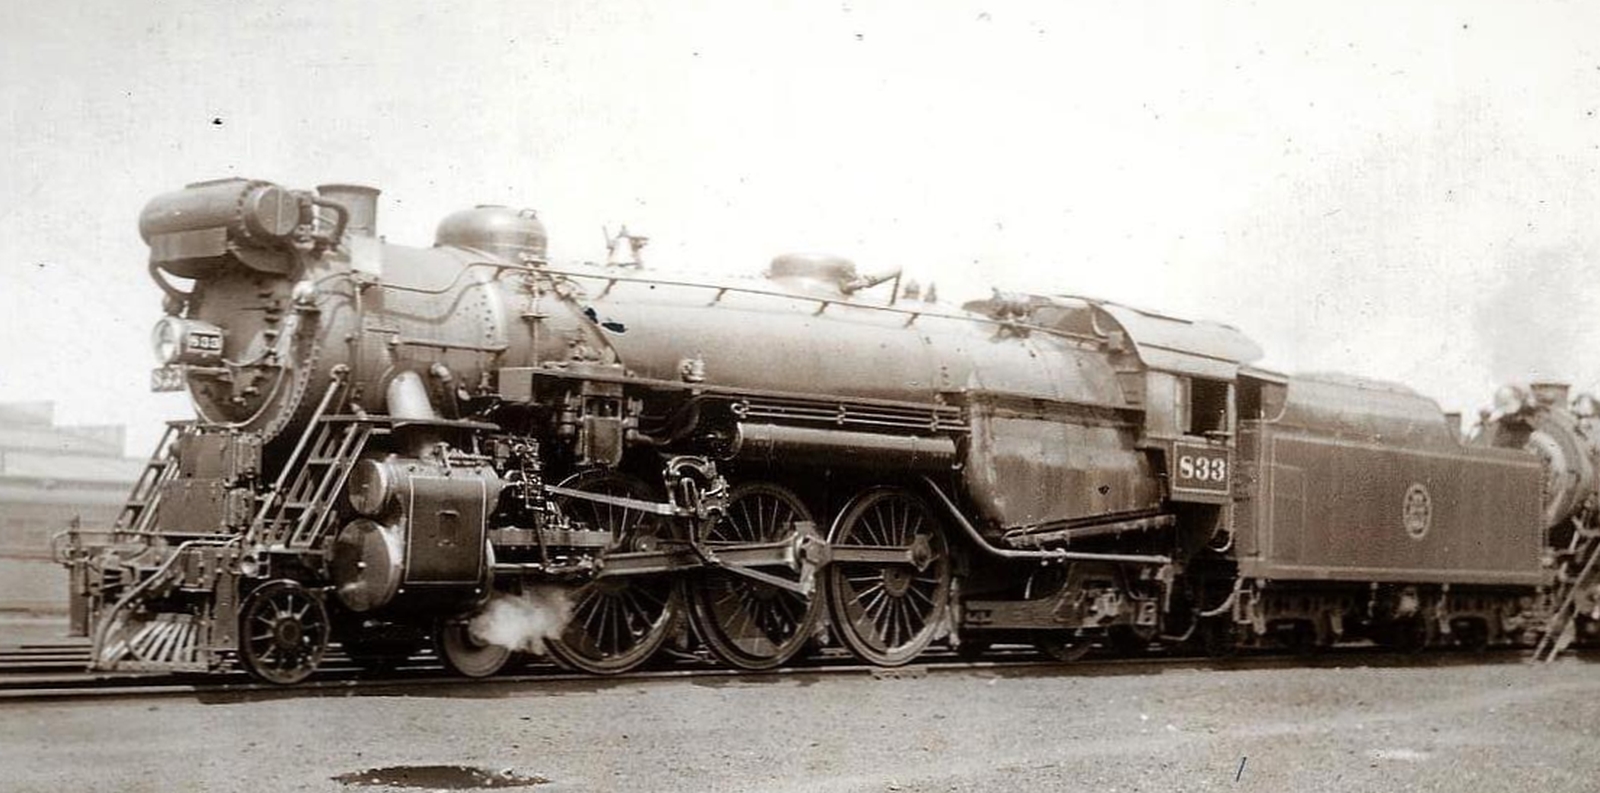 No. 833 in December 1937 at Atlantic City, New Jersey